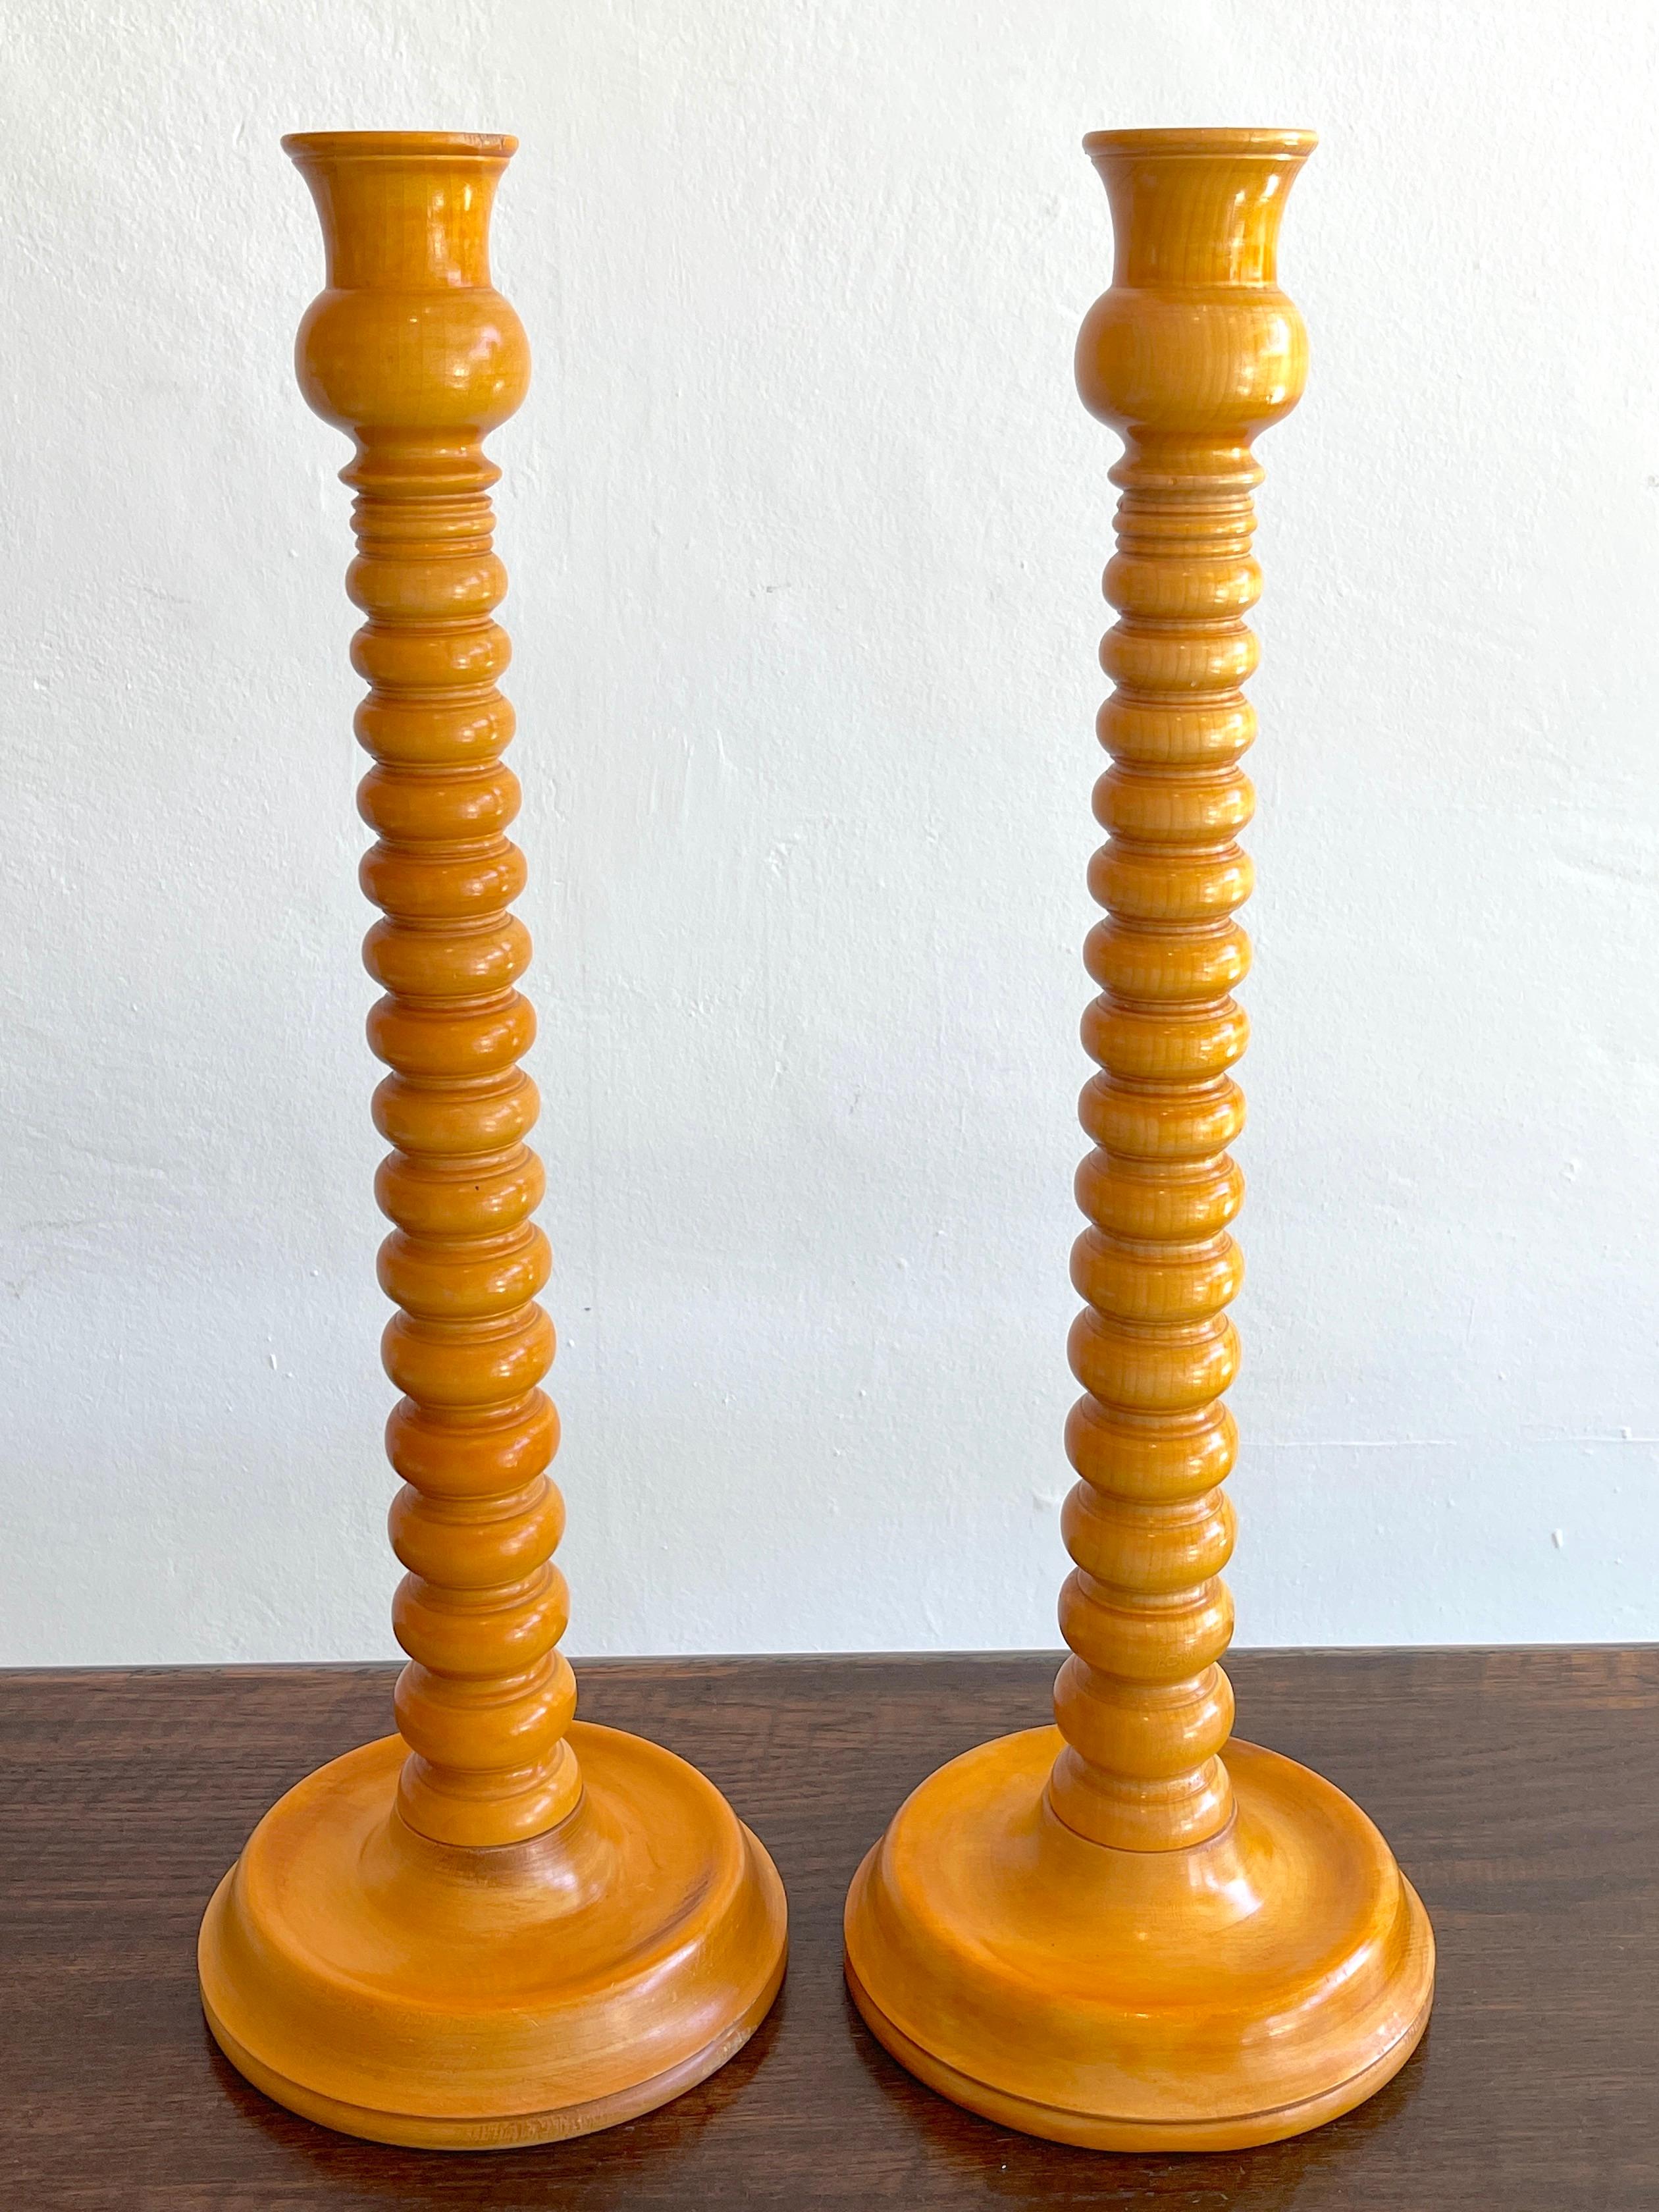 Large Pair of 19th C English Elm Wood Barley Twist Candlesticks, Each one of book-matched carved Elm wood standing 23.5